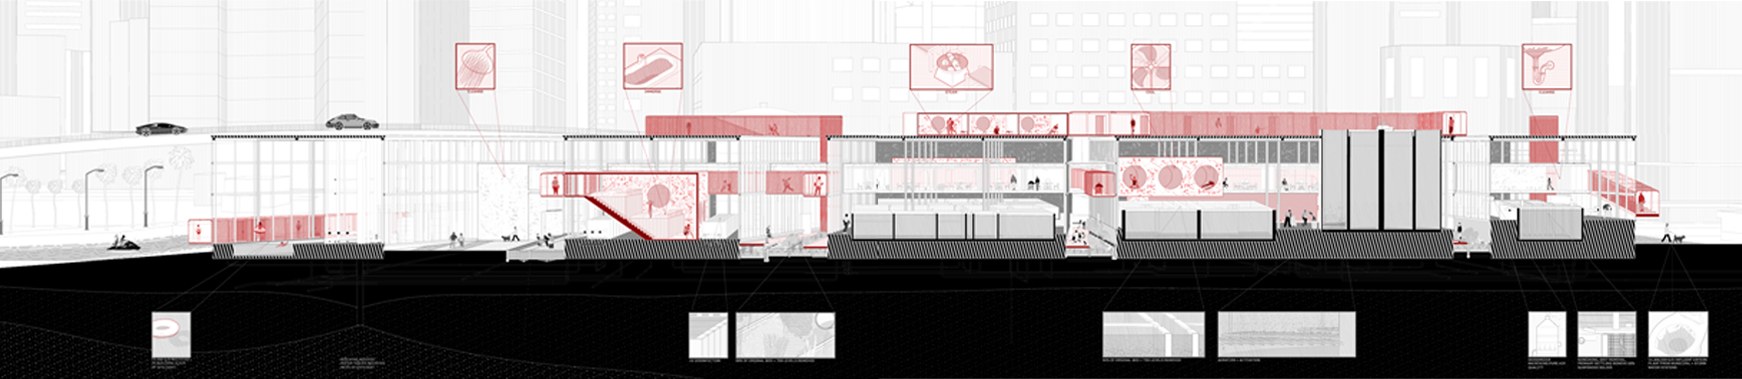 Leah Bohatch and Camille Kreisel's thesis: section perspective of building